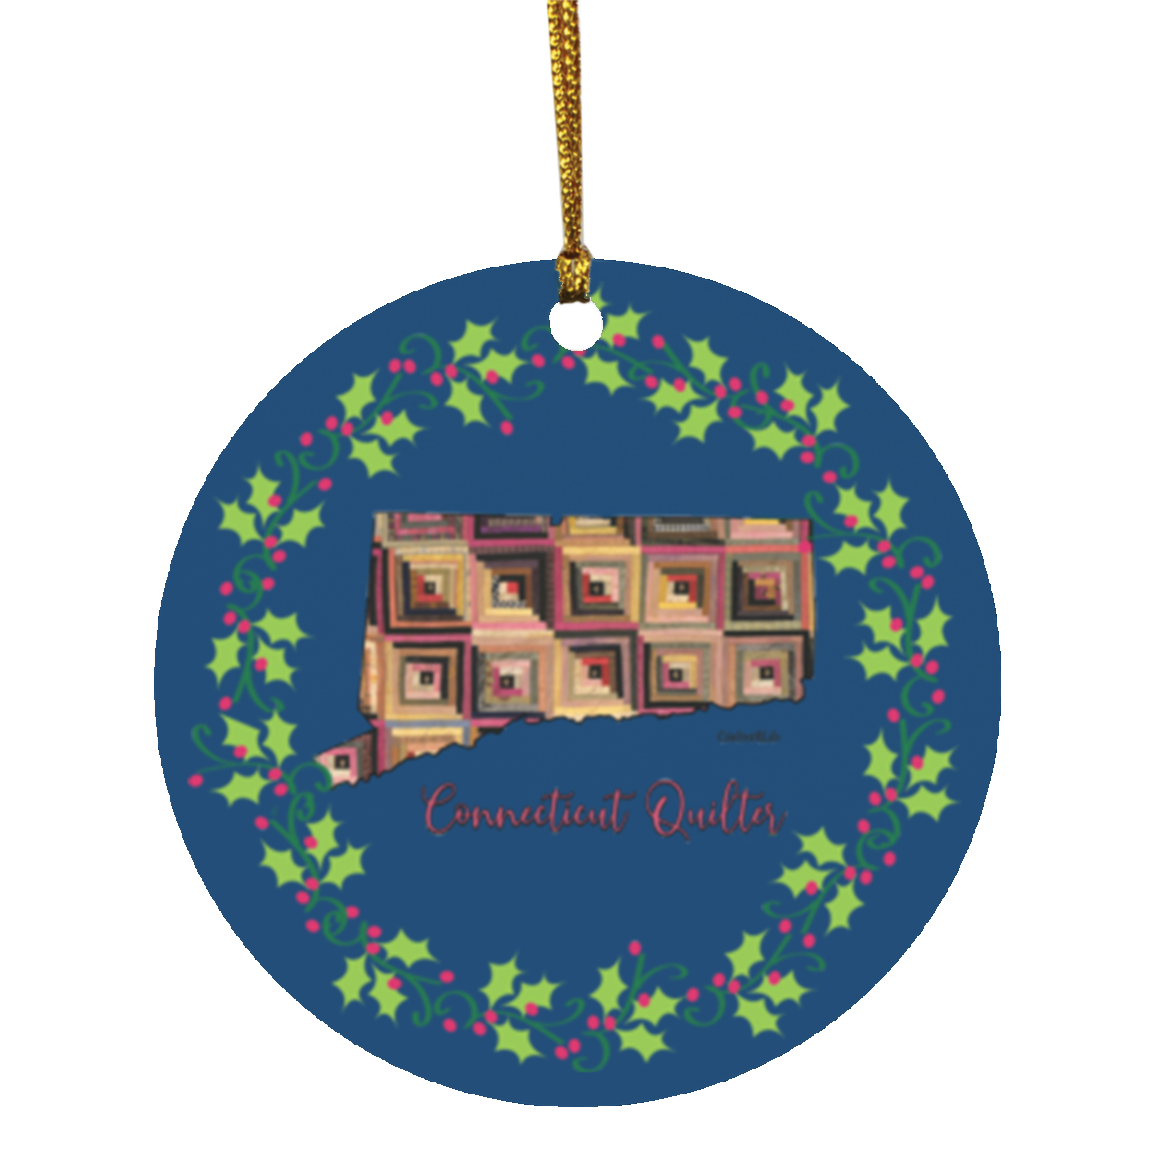 Connecticut Quilter Christmas Circle Ornament